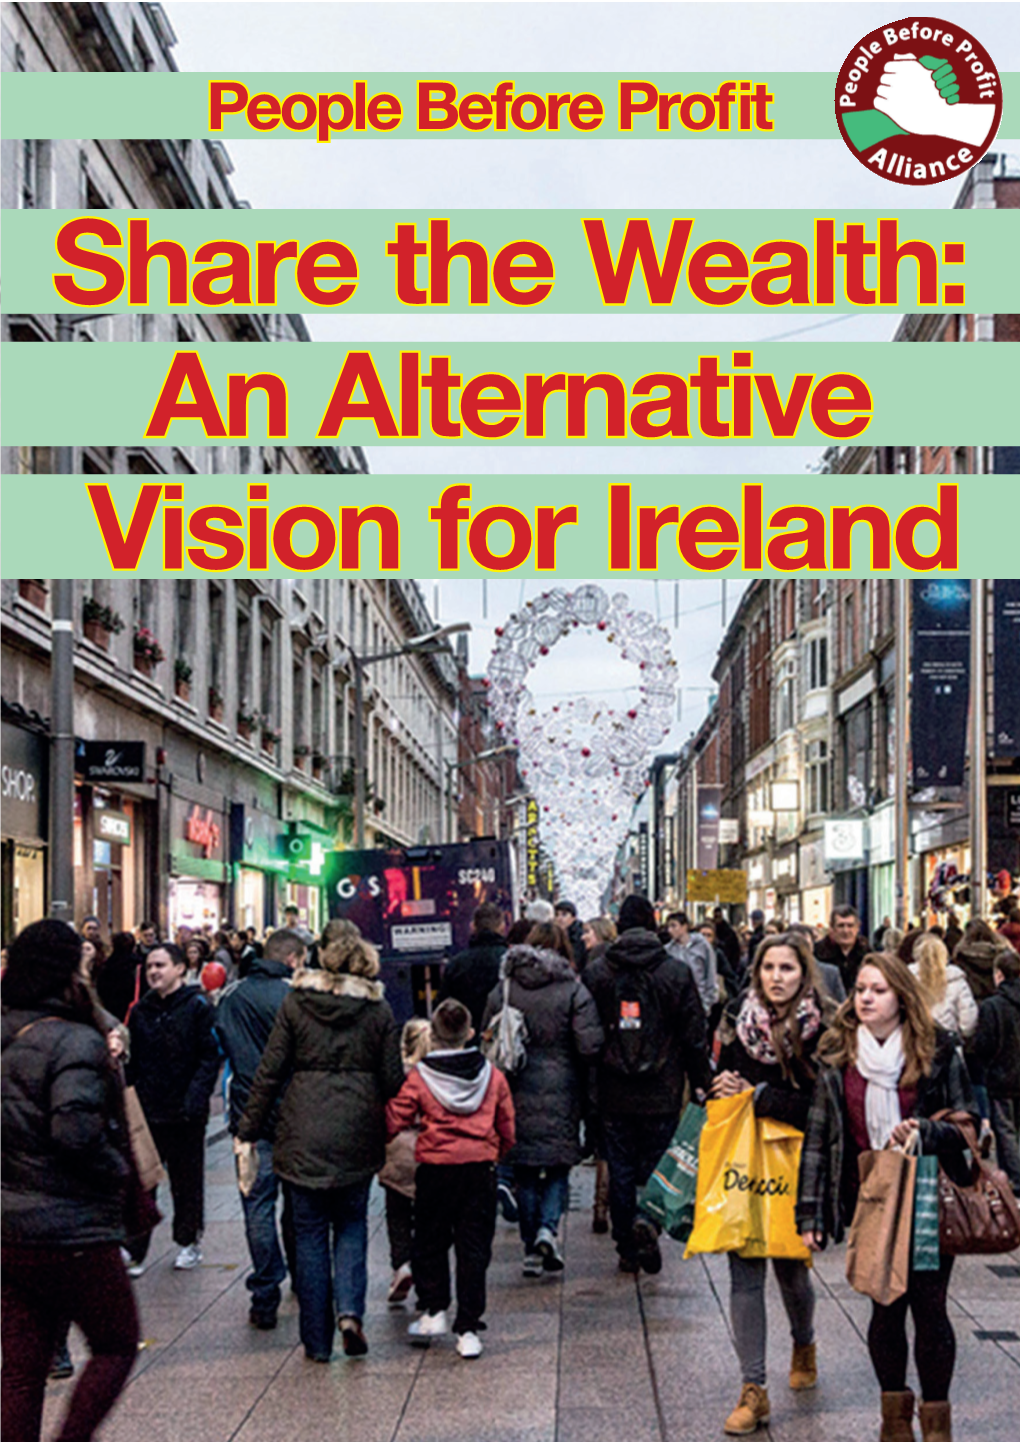 Share the Wealth: an Alternative Vision for Ireland